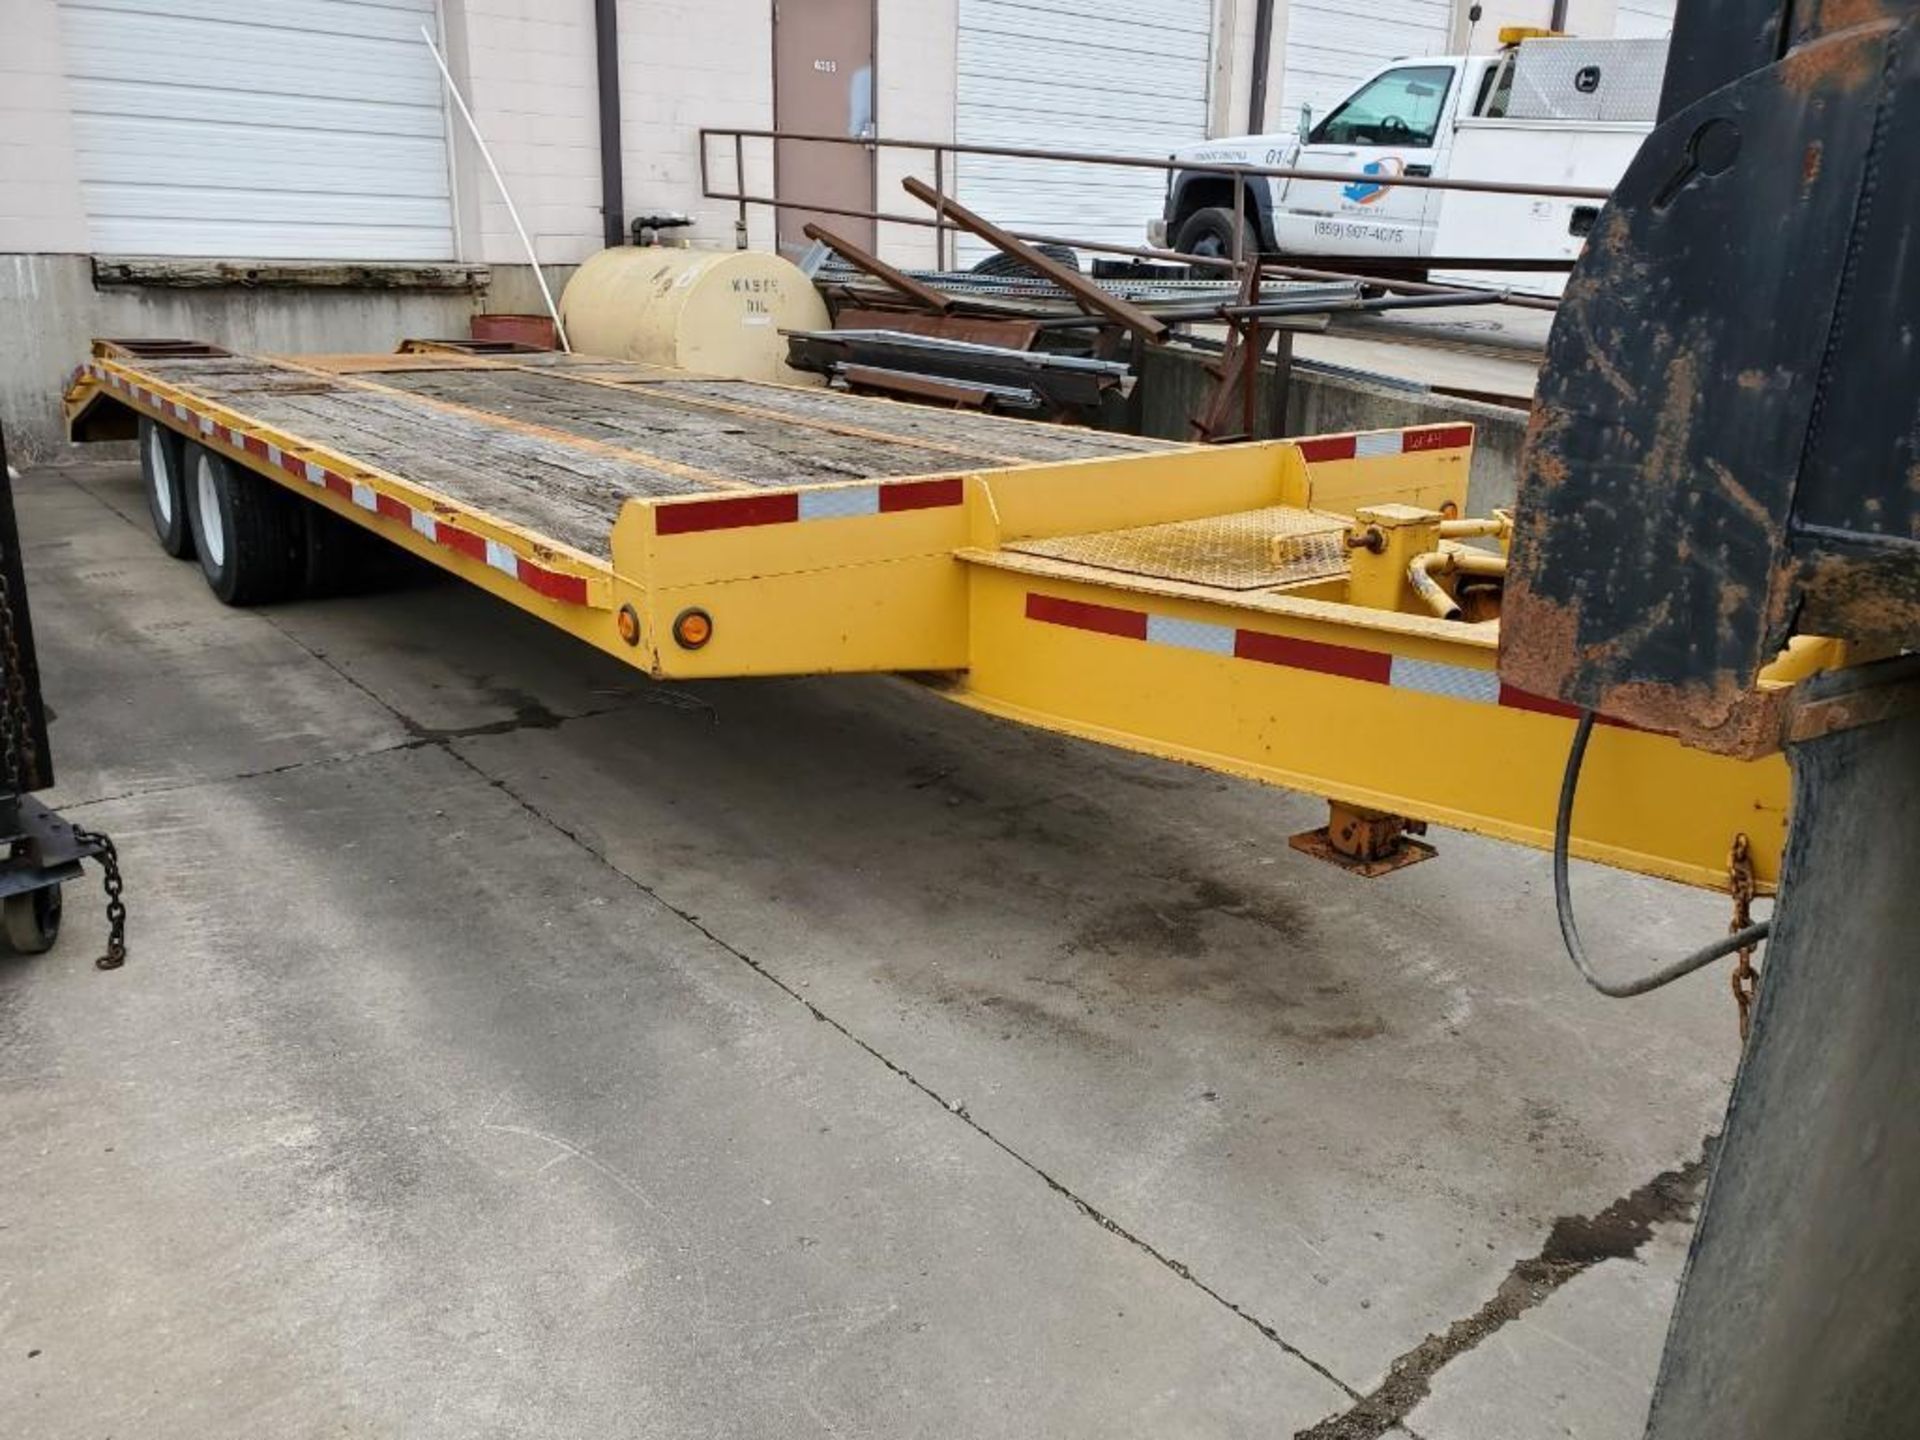 25' T/A DOVETAIL TRAILER, PINTLE HITCH, AIR BRAKES, WOOD DECK, STAKE BED, FOLD OVER STEEL RAMPS, DUA - Image 15 of 18